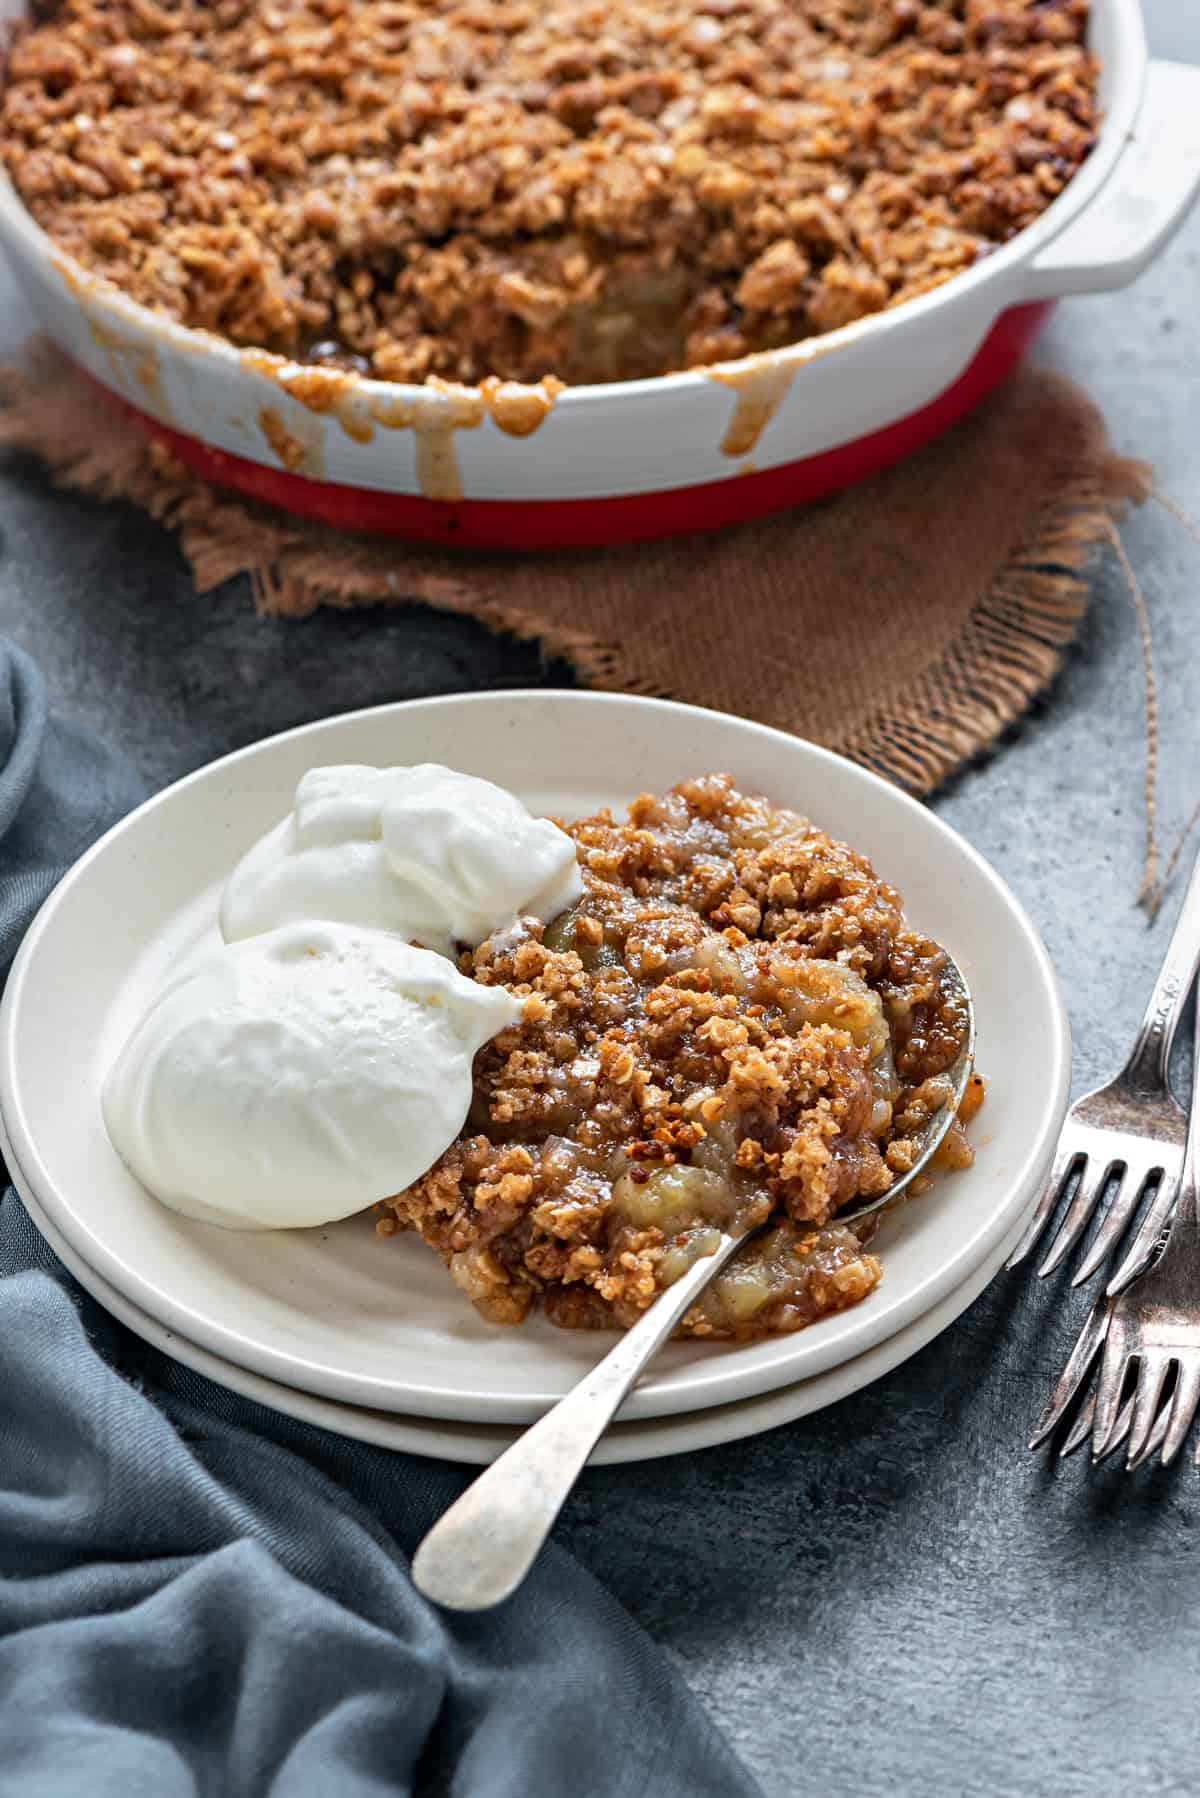 Apple crumble with oats topping on a plate with whipped vanilla cream.